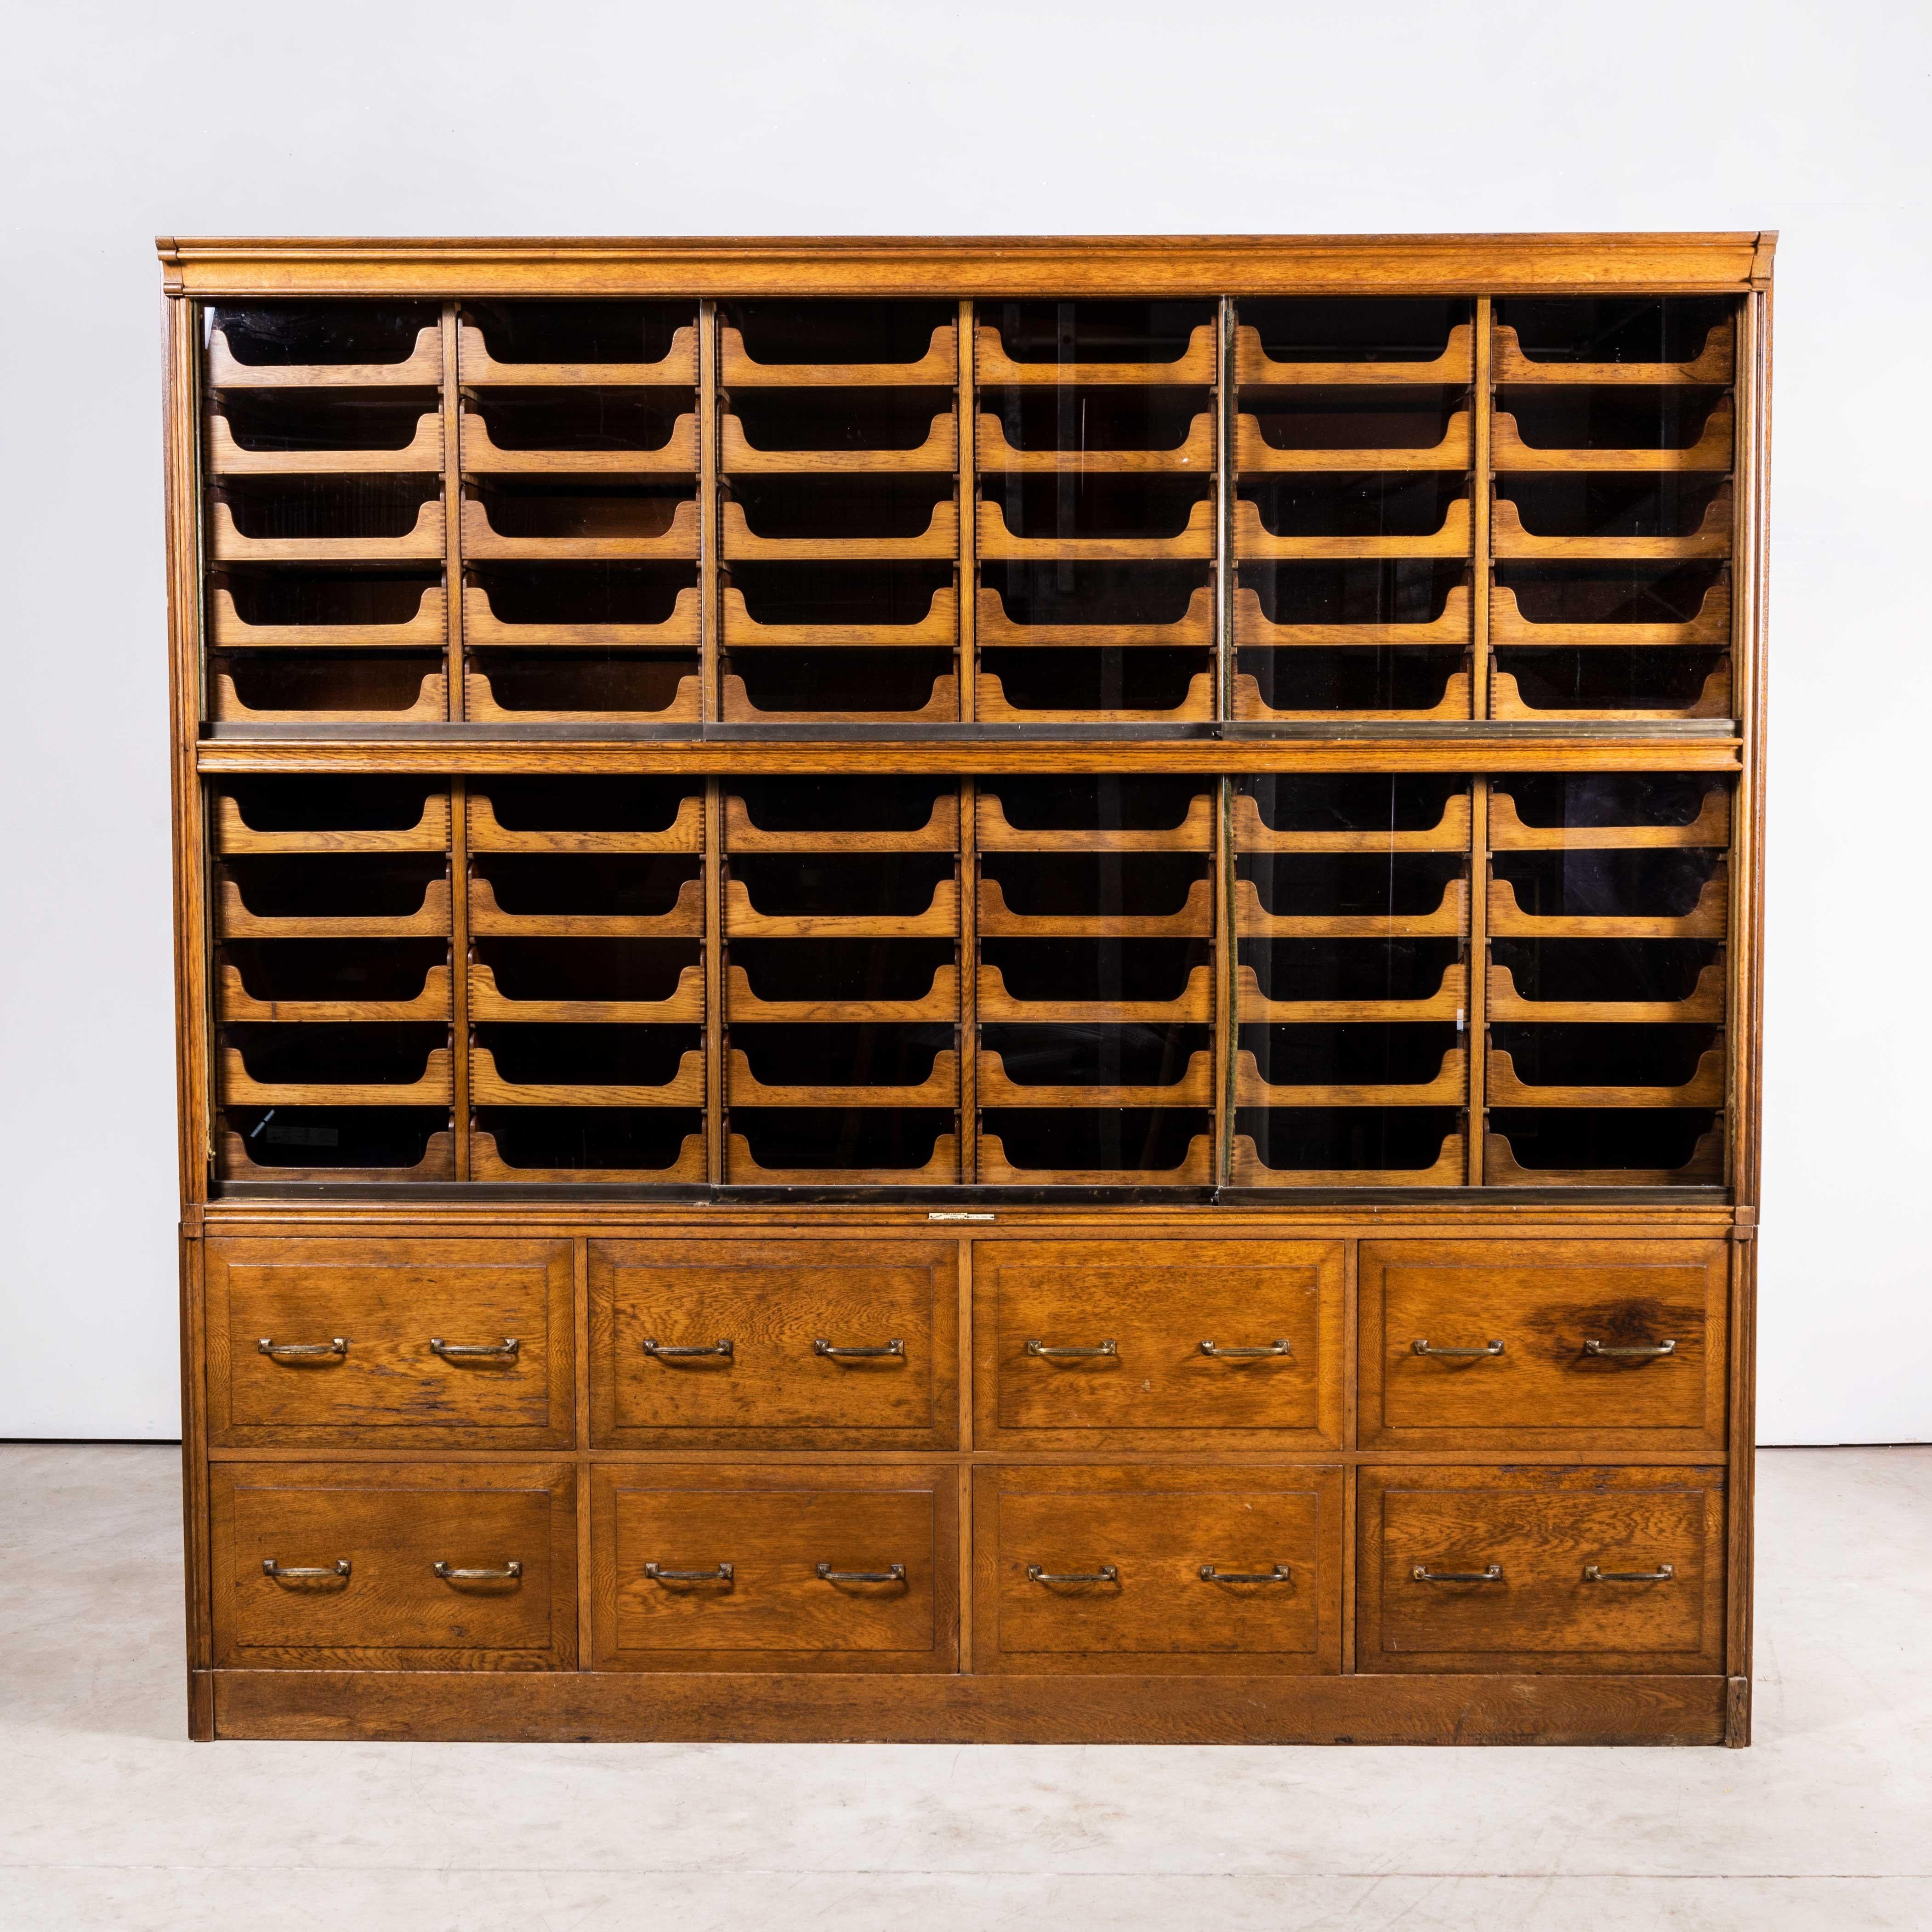 1920’s Large Glass Fronted Haberdashery Unit – Harris & Sheldon
1920’s Large Glass Fronted Haberdashery Unit – Harris & Sheldon. Exceptional and fully original large haberdashery unit by Harris & Sheldon, better known as Selphast shop fitters of